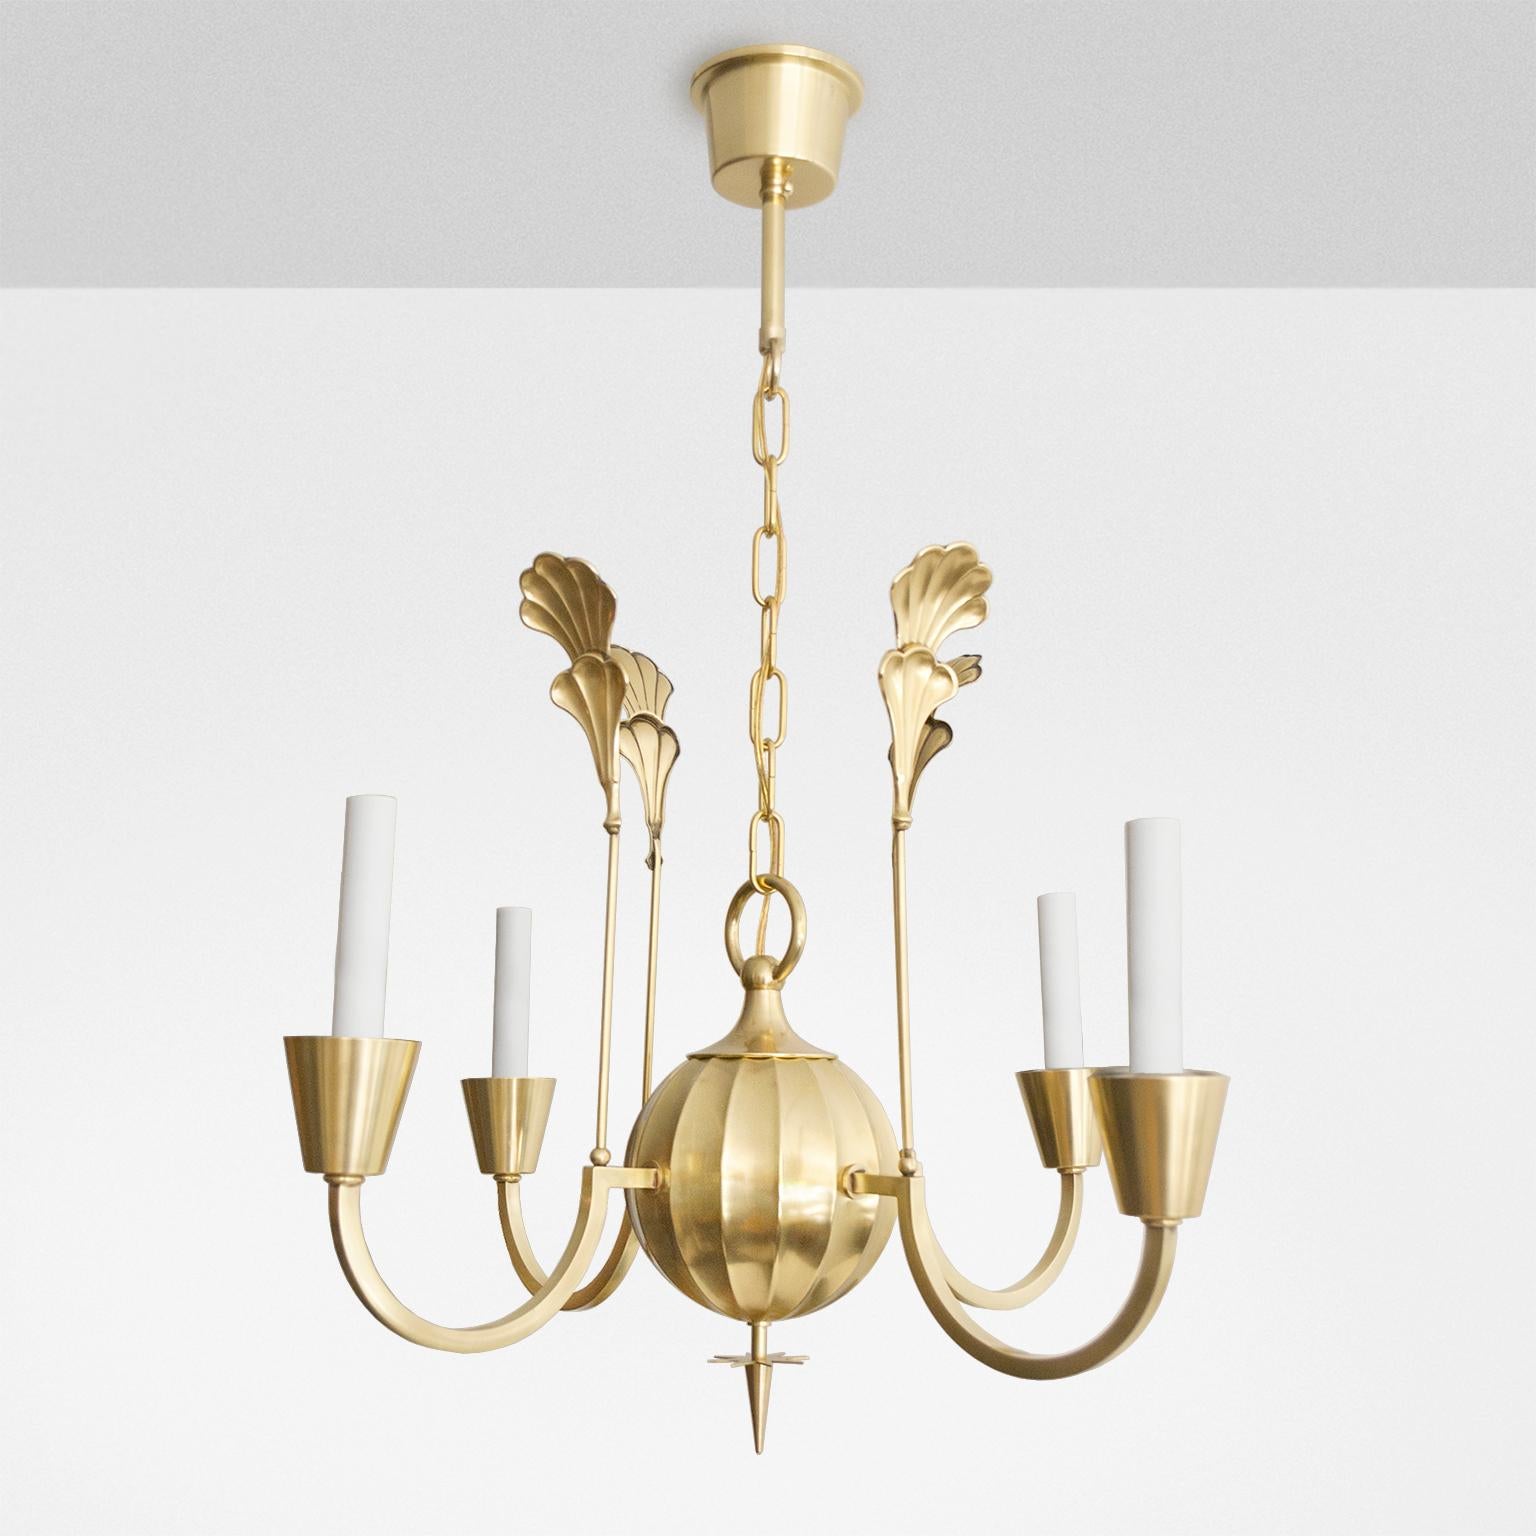 An elegant Swedish Art Deco polished 4-arm brass chandelier designed by Elis Bergh for C.G. Hallberg silversmith, Stockholm, Sweden circa 1925. Newly restored, polished and lacquered, and newly electrified with candelabra base sockets for use in